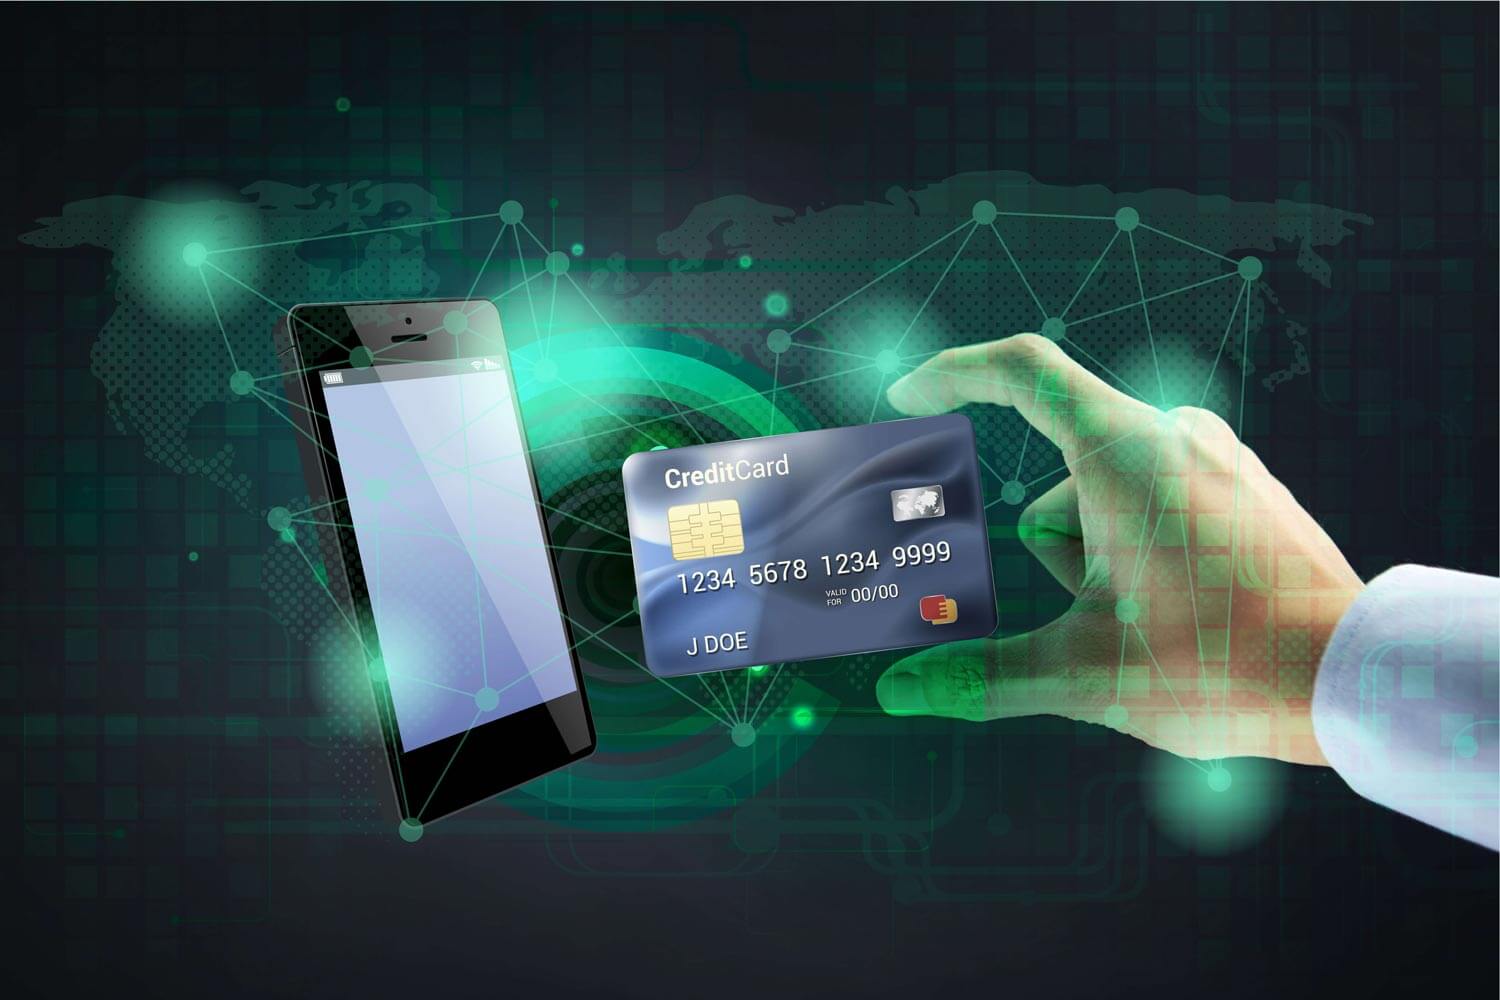 Payment card being held over a payment device